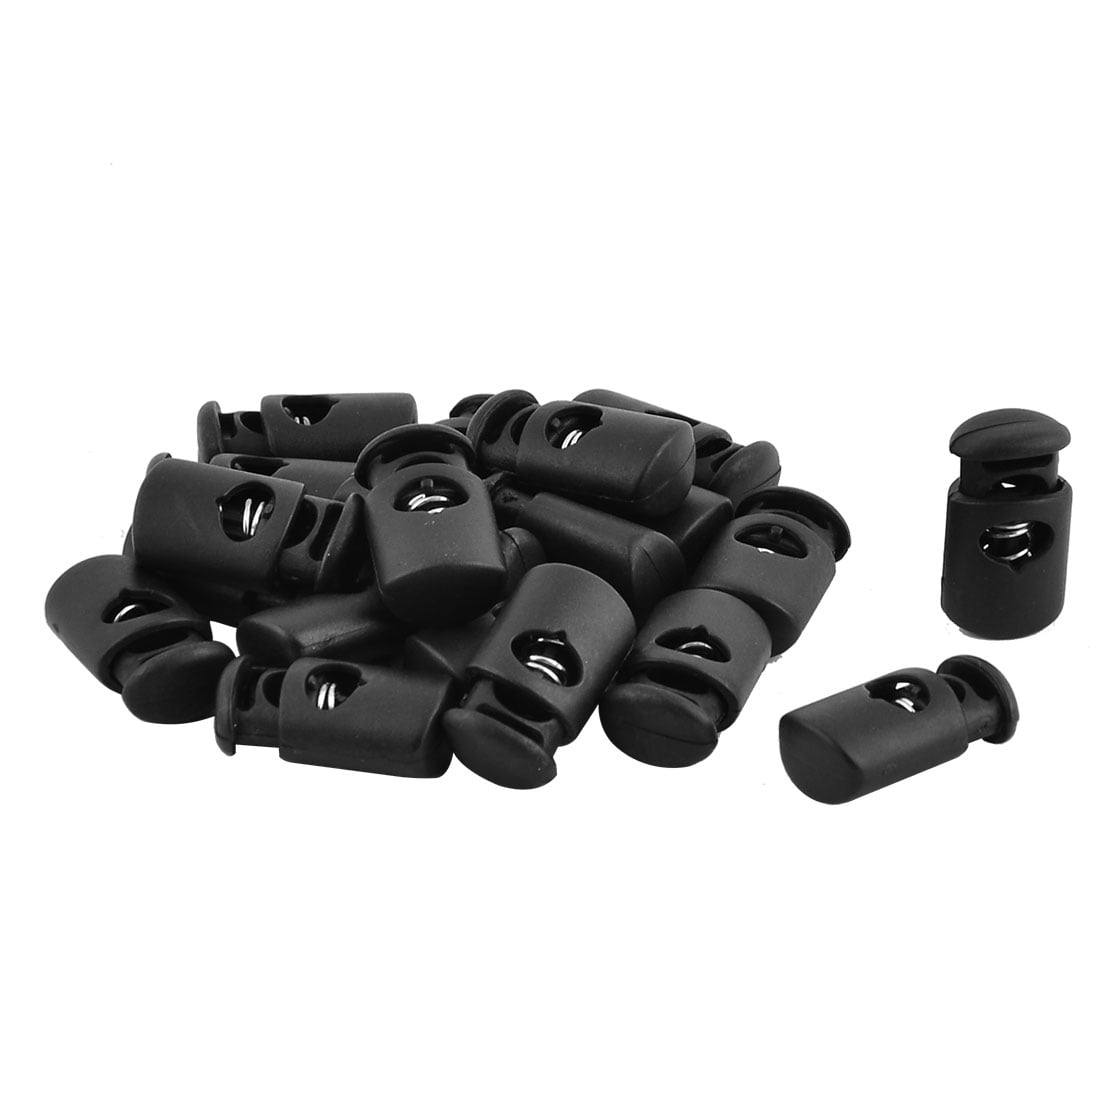 Stonex Plastic Cord Locks, Strap Stopper for bags garment rucksack  drawstring tie down, CL Series - Stonex Co. - Plastic Buckles and  Accessories